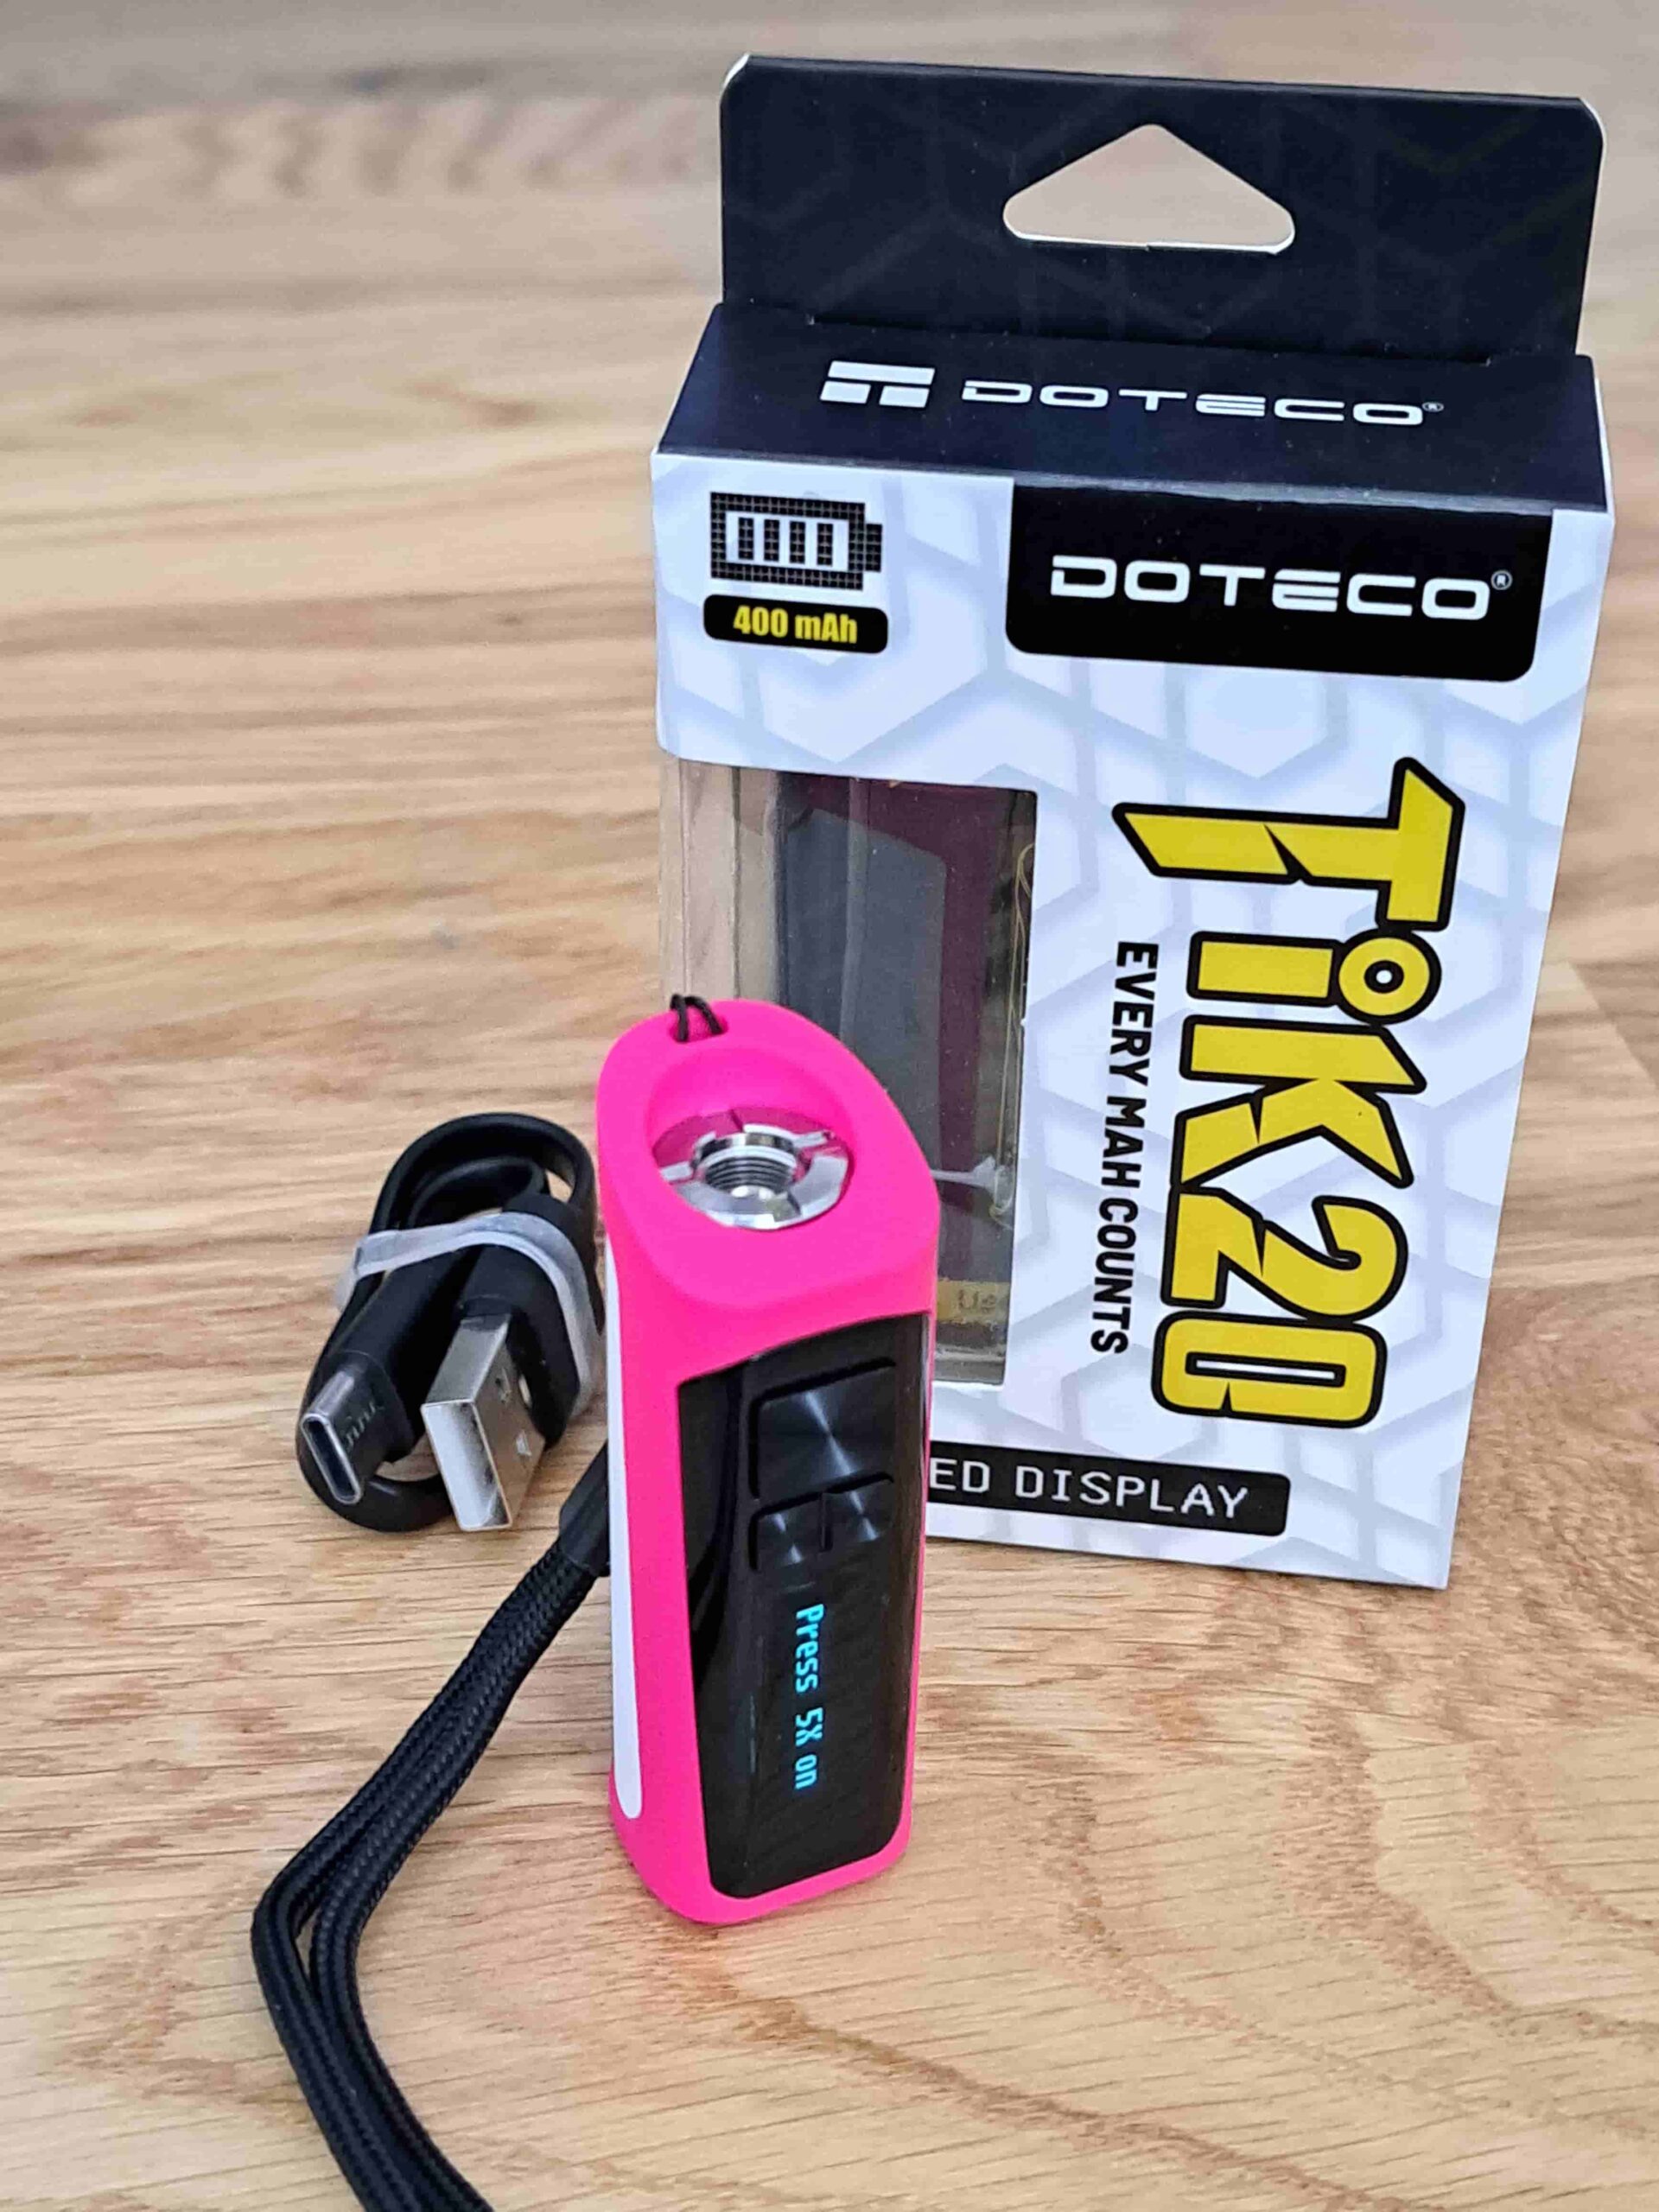 Doteco TIK20 Battery - OLED screen portable charger.